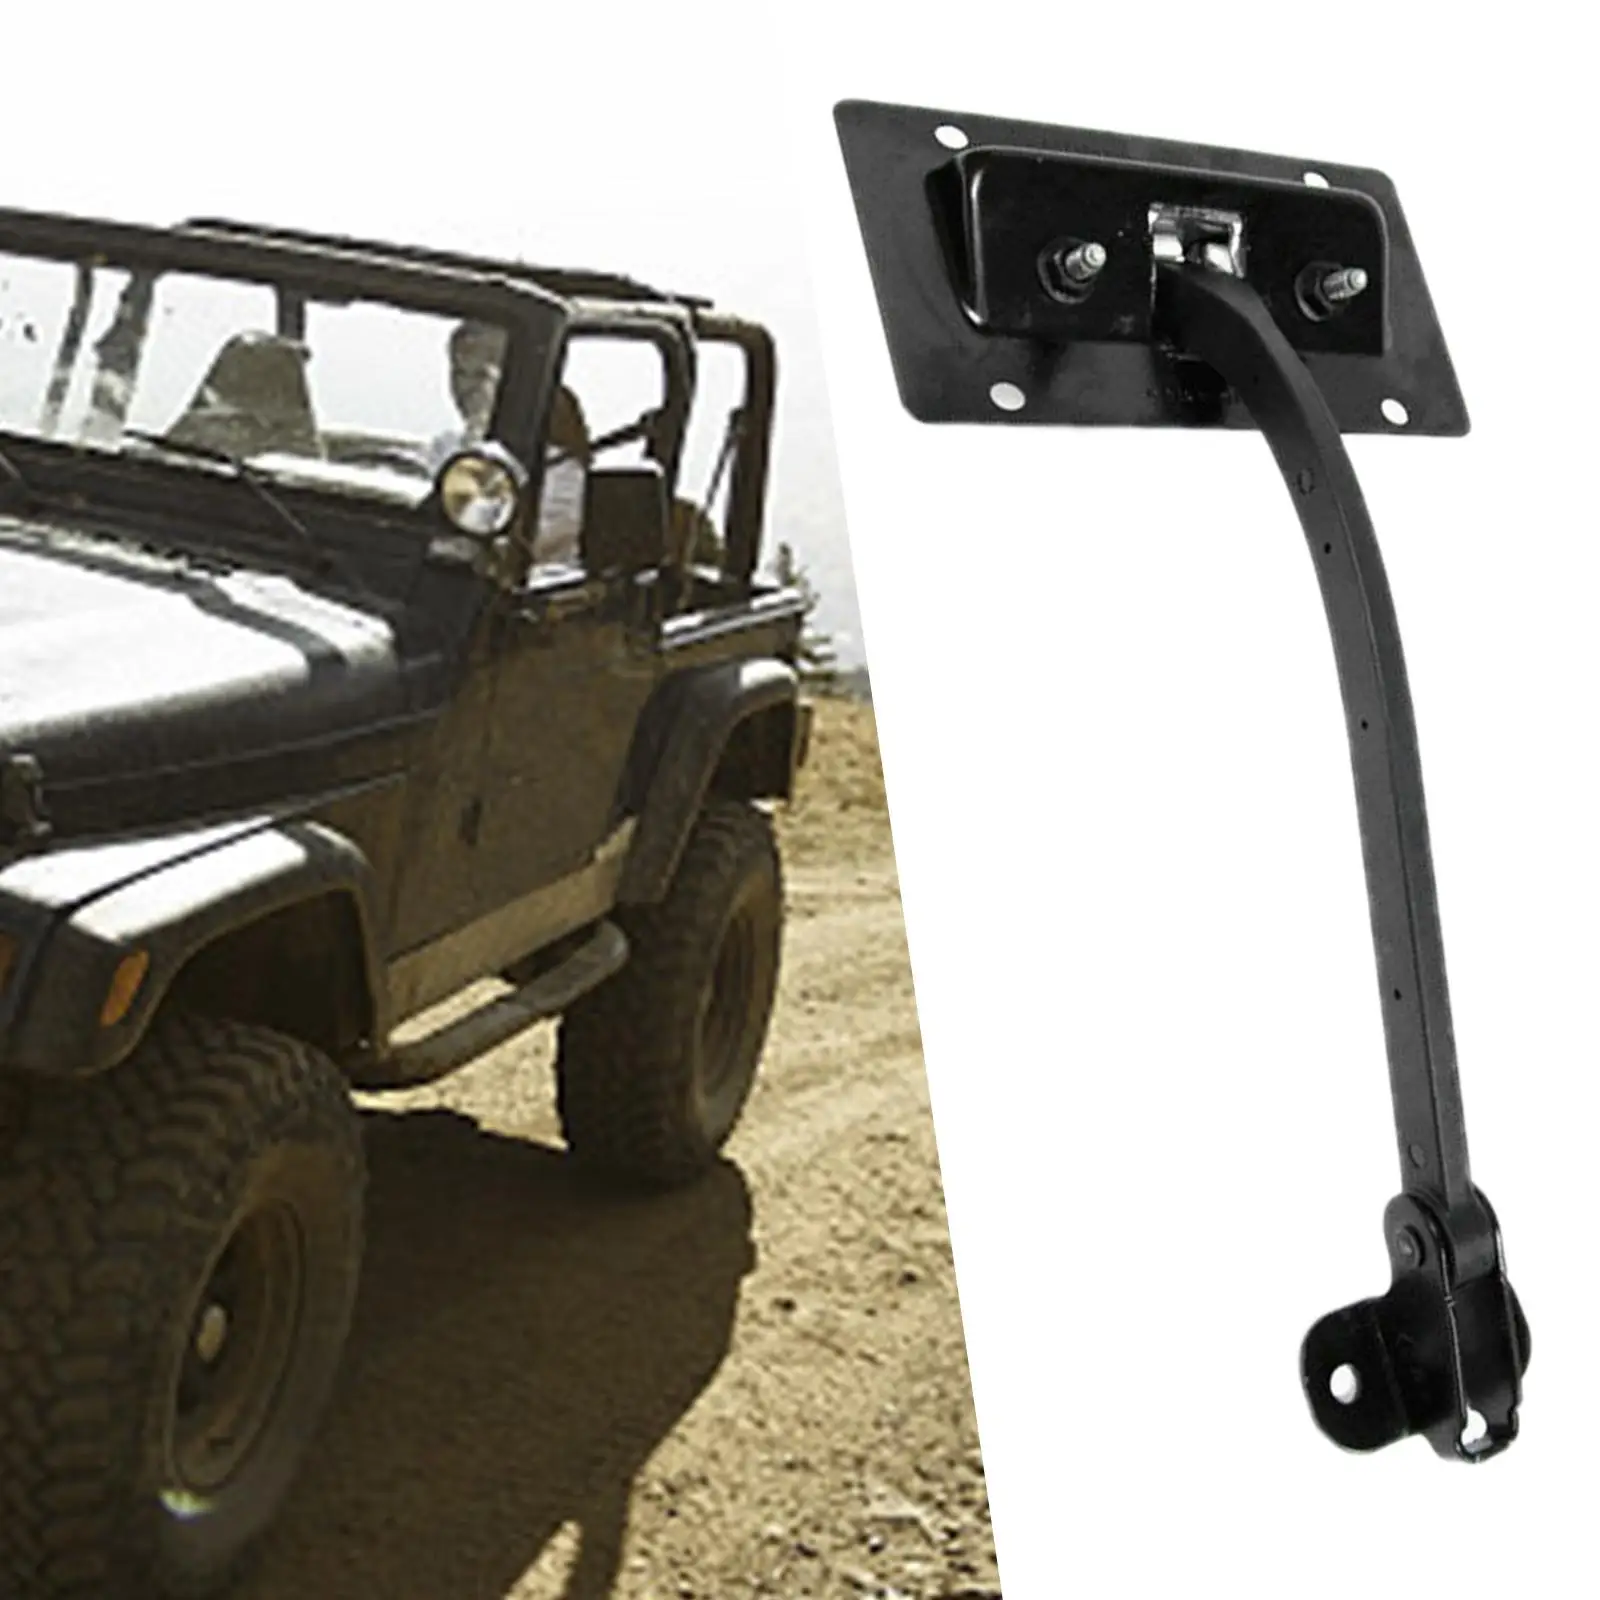 Retaining Strap 4589890AC Durable Professional Replaces Swing Gate Tail Gate Rear Gate Check Strap Arm for Jeep Wrangler JK